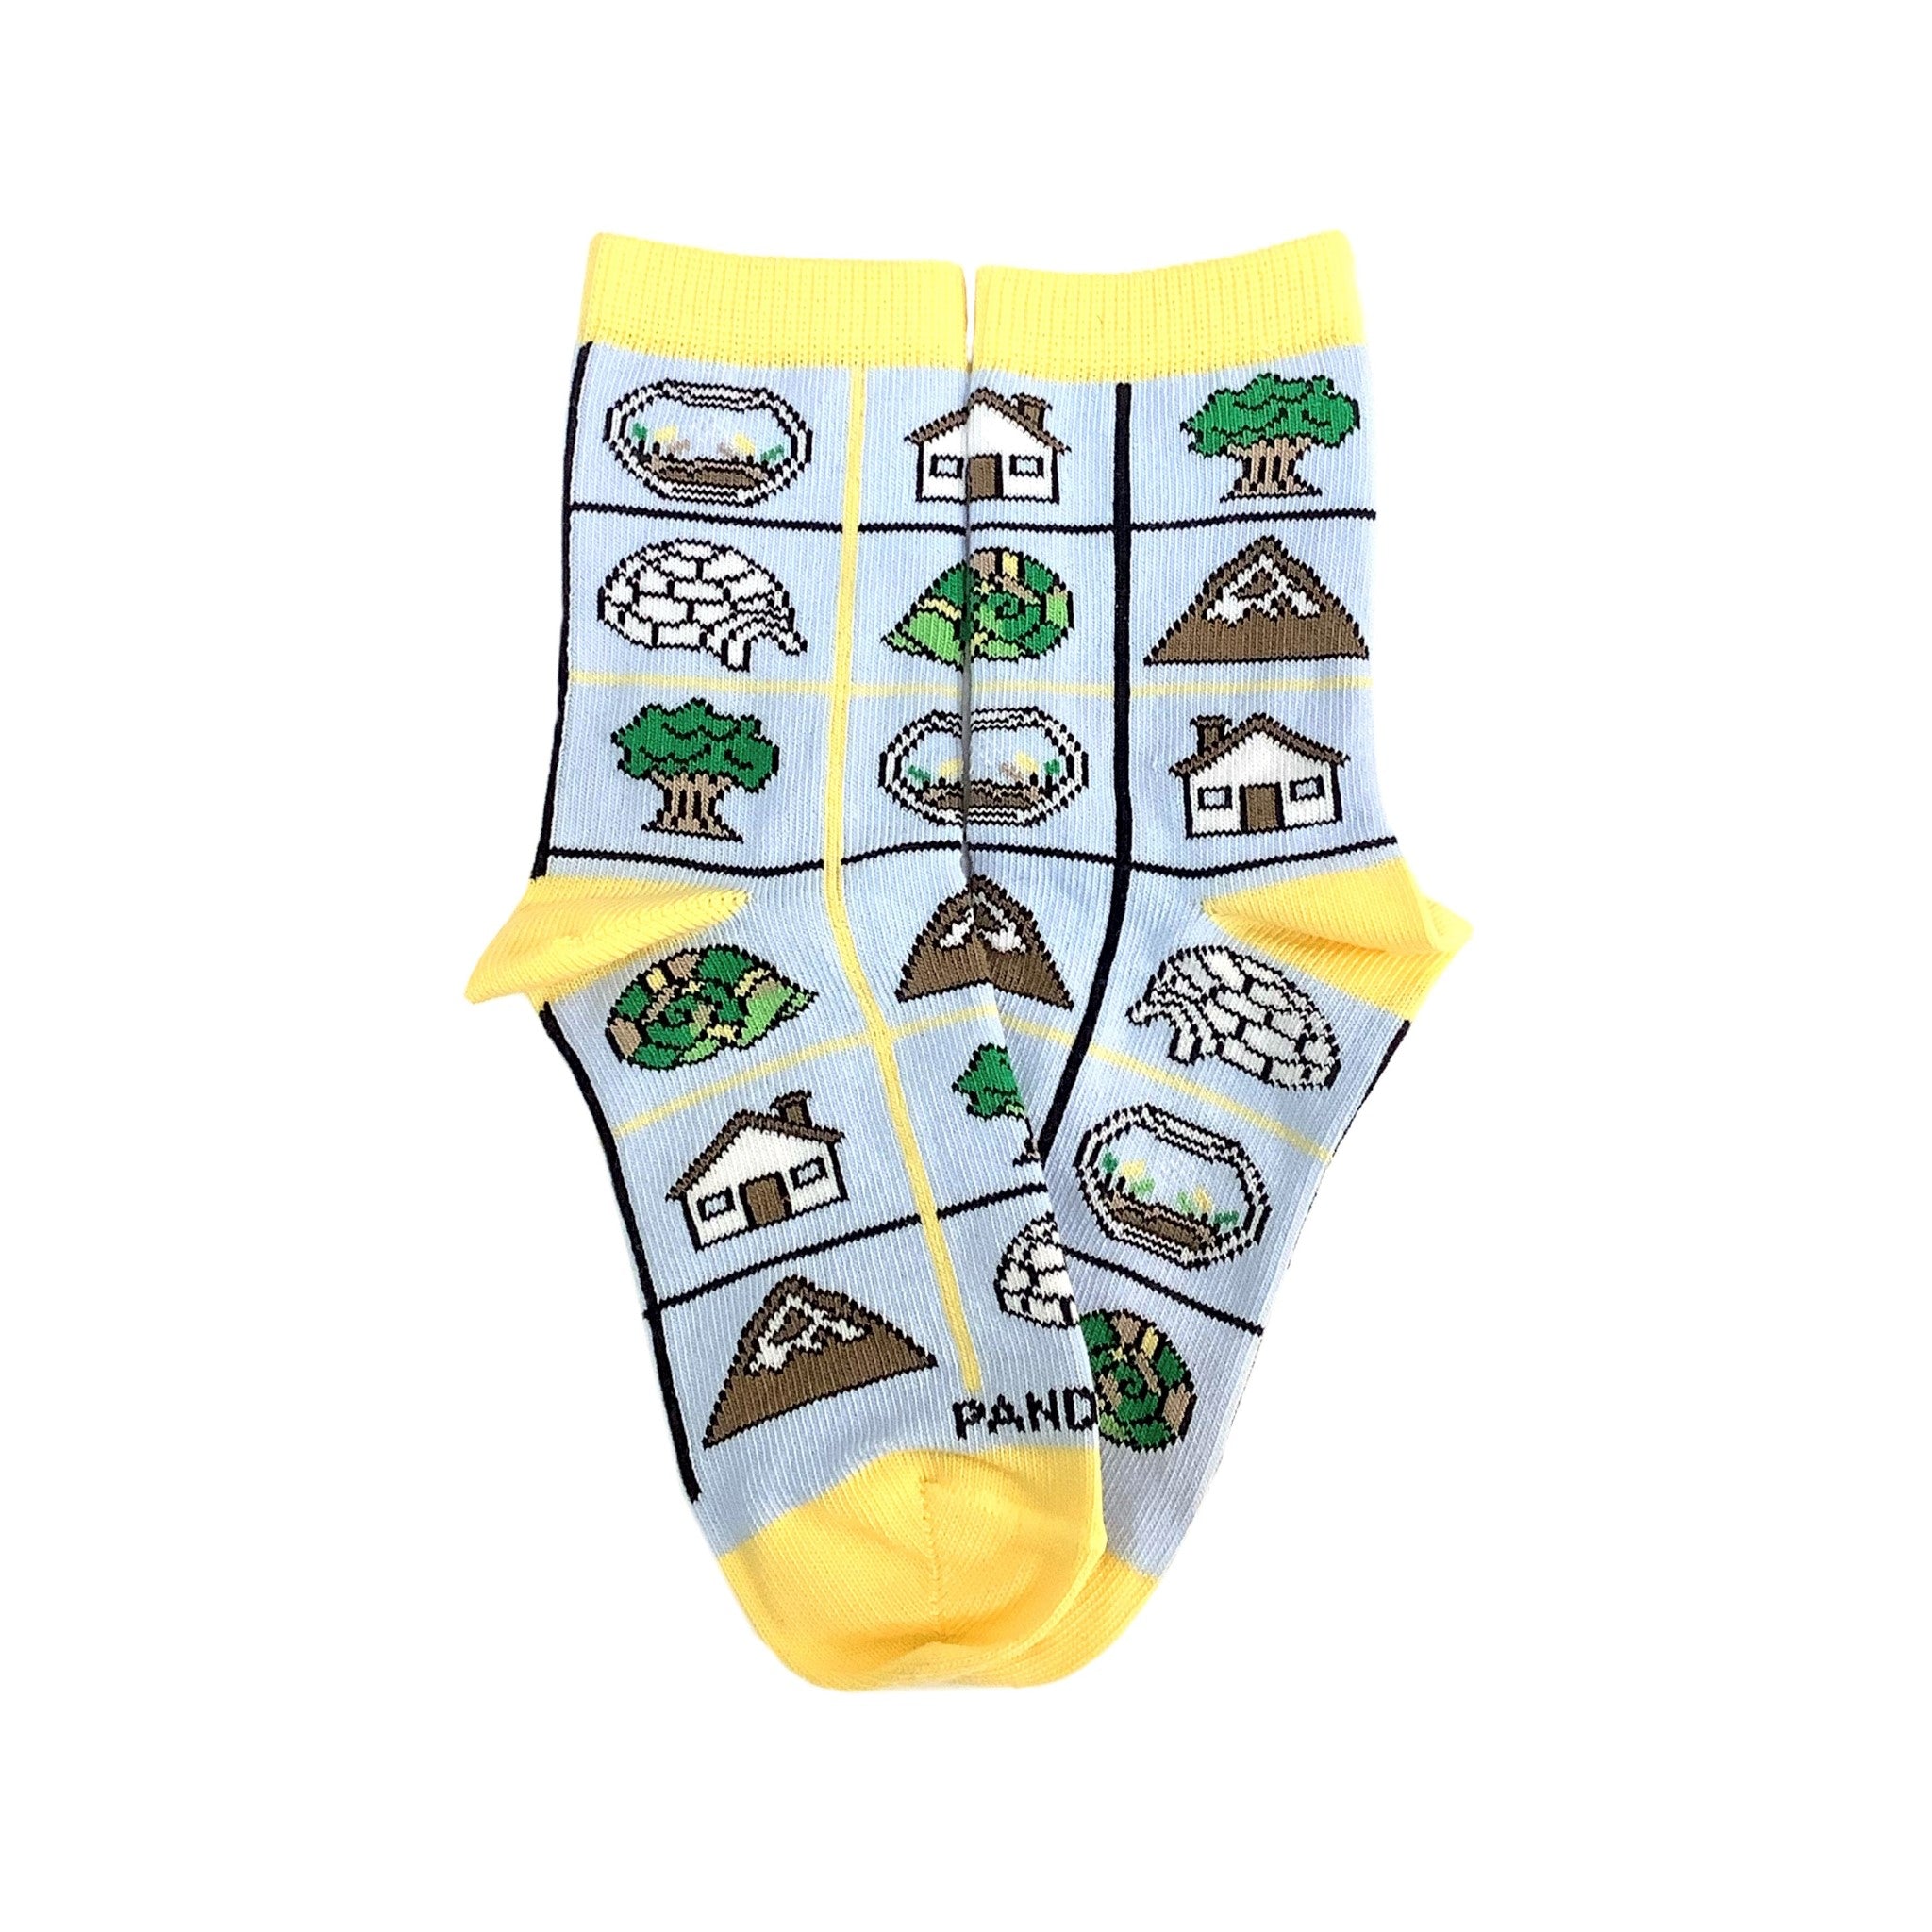 Home Sweet Home Socks (Ages 3-7)